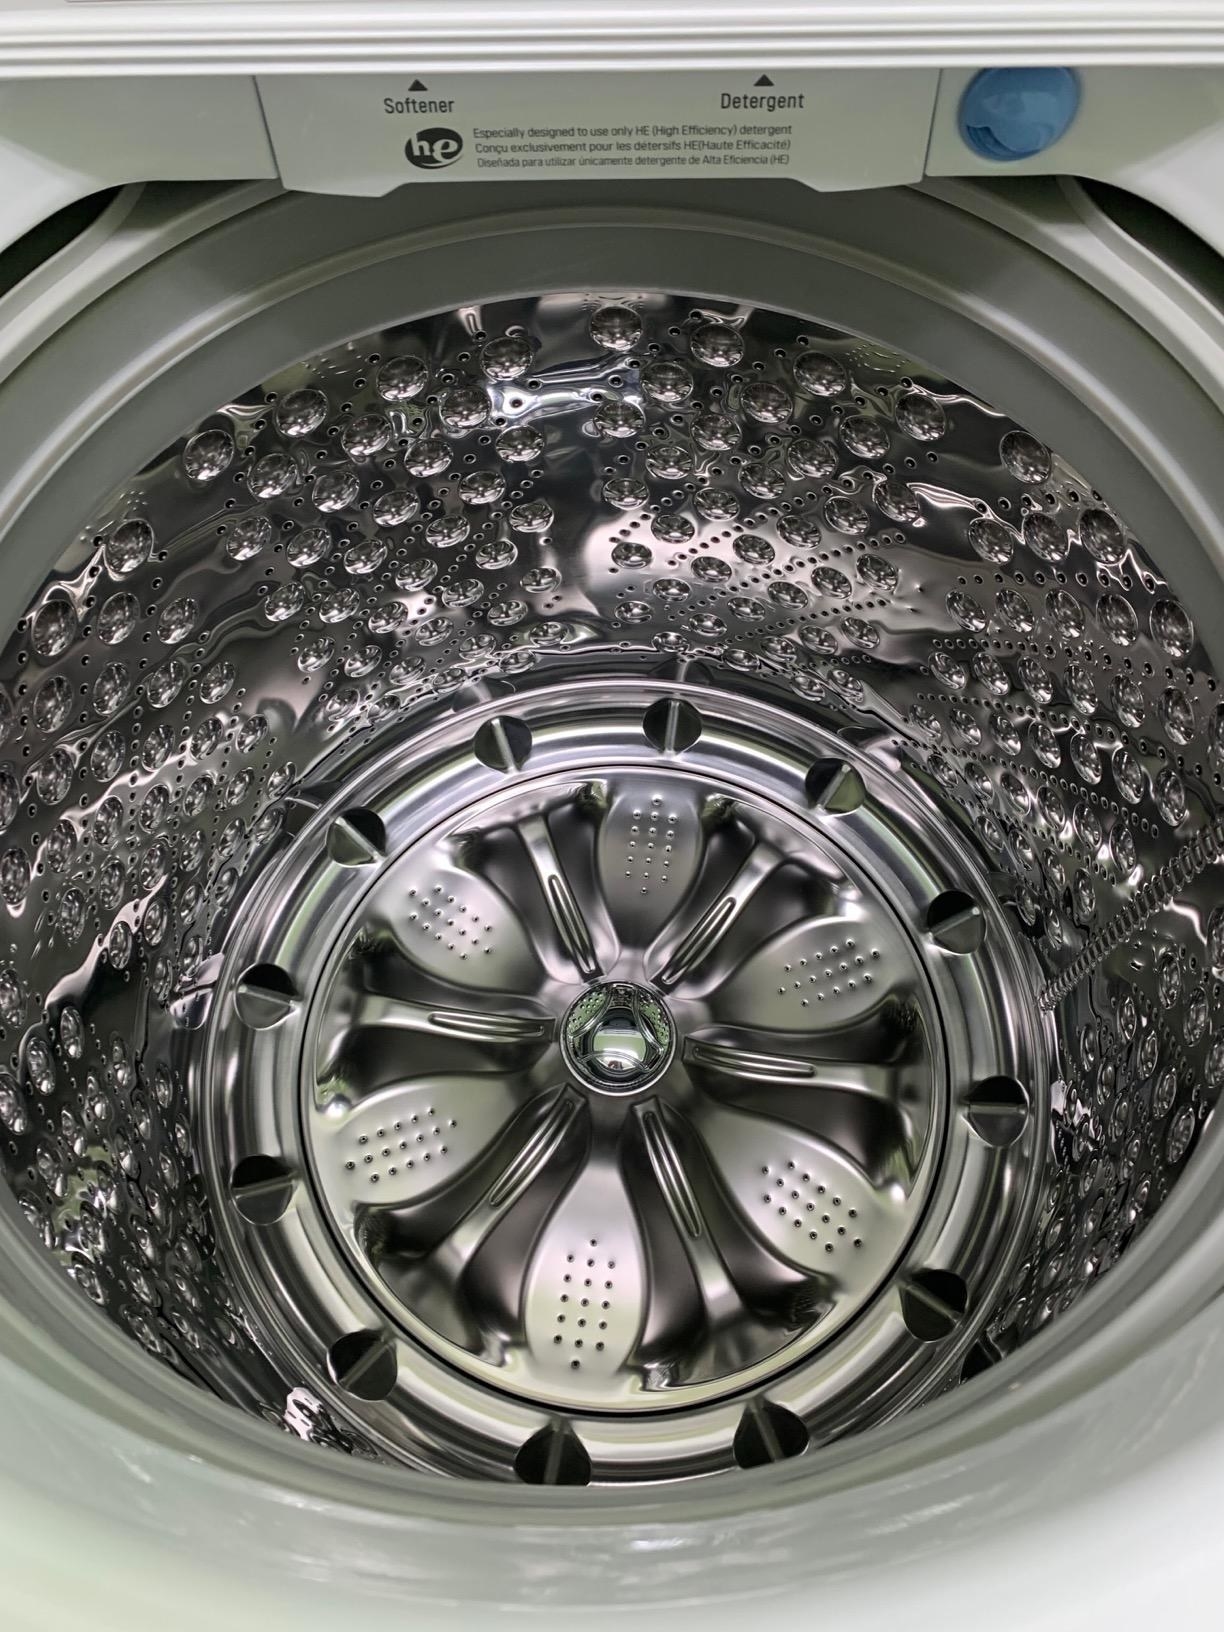 reviewer image of the sparklingly clean inside of a washing machine